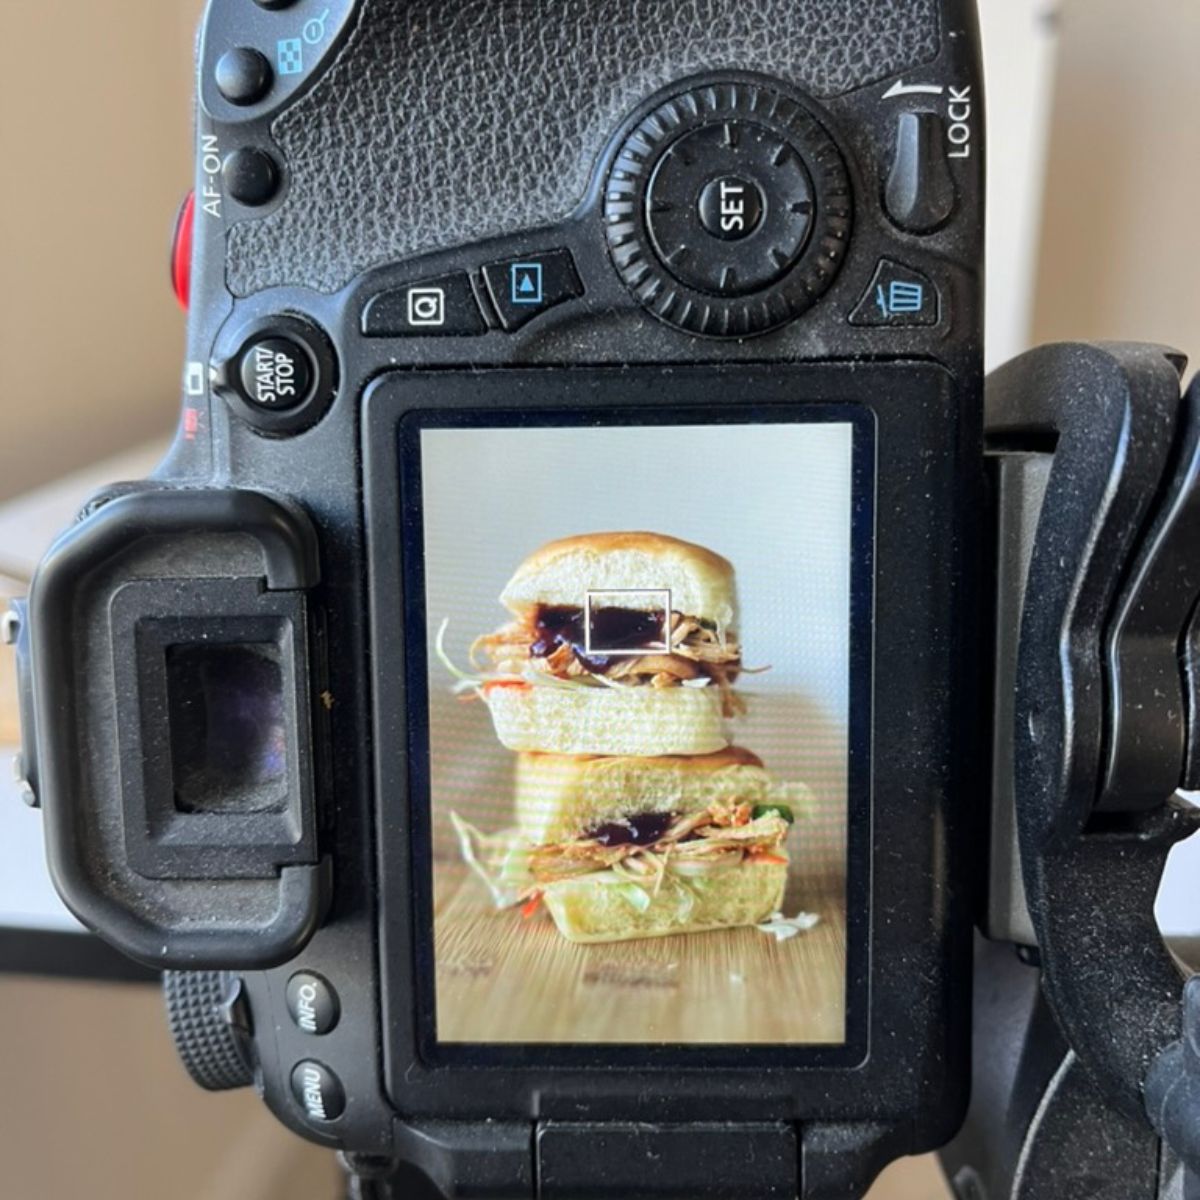 stacked sliders in the view finder of an DSLR camera.